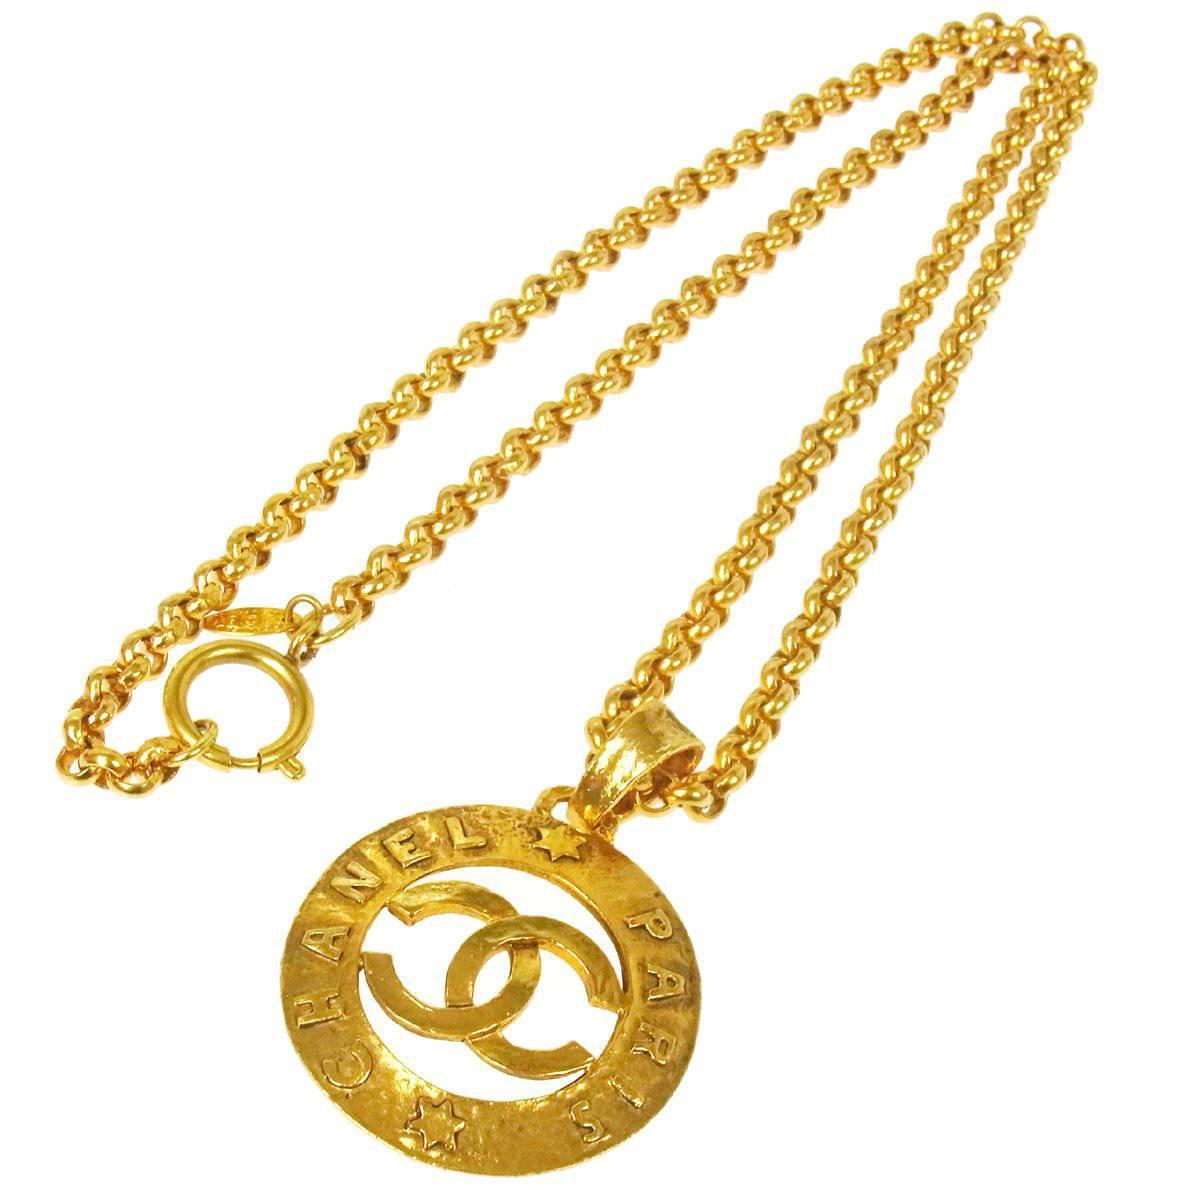 Chanel Vintage Gold Large Coin Charm Pendant Long Drape Necklace in Box